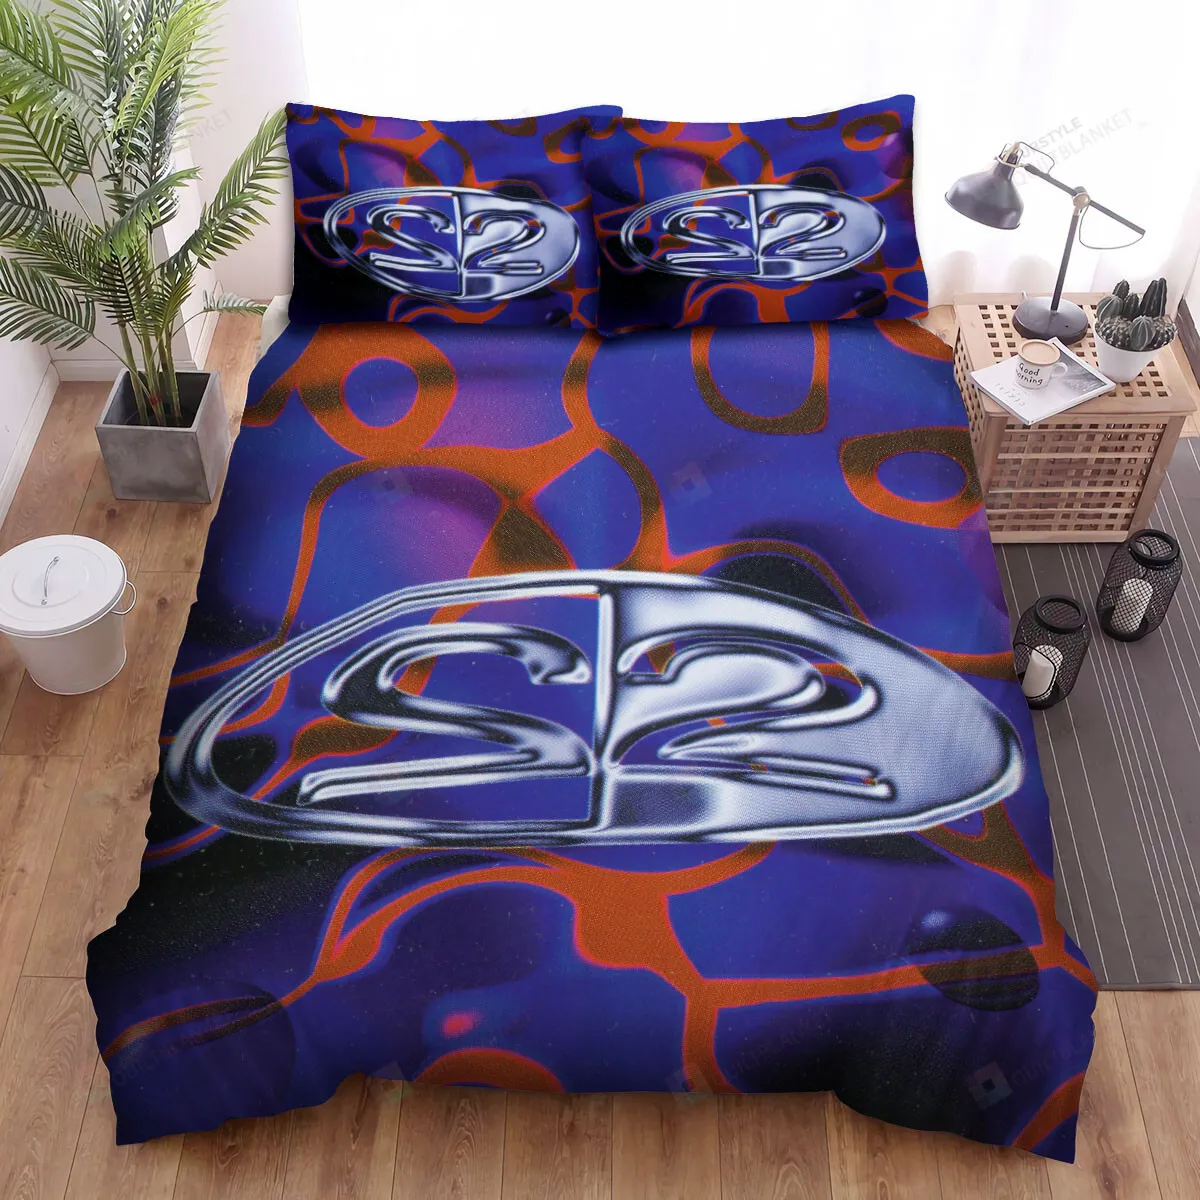 2 Unlimited Spread Your Love Bed Sheets Spread Comforter Duvet Cover Bedding Sets